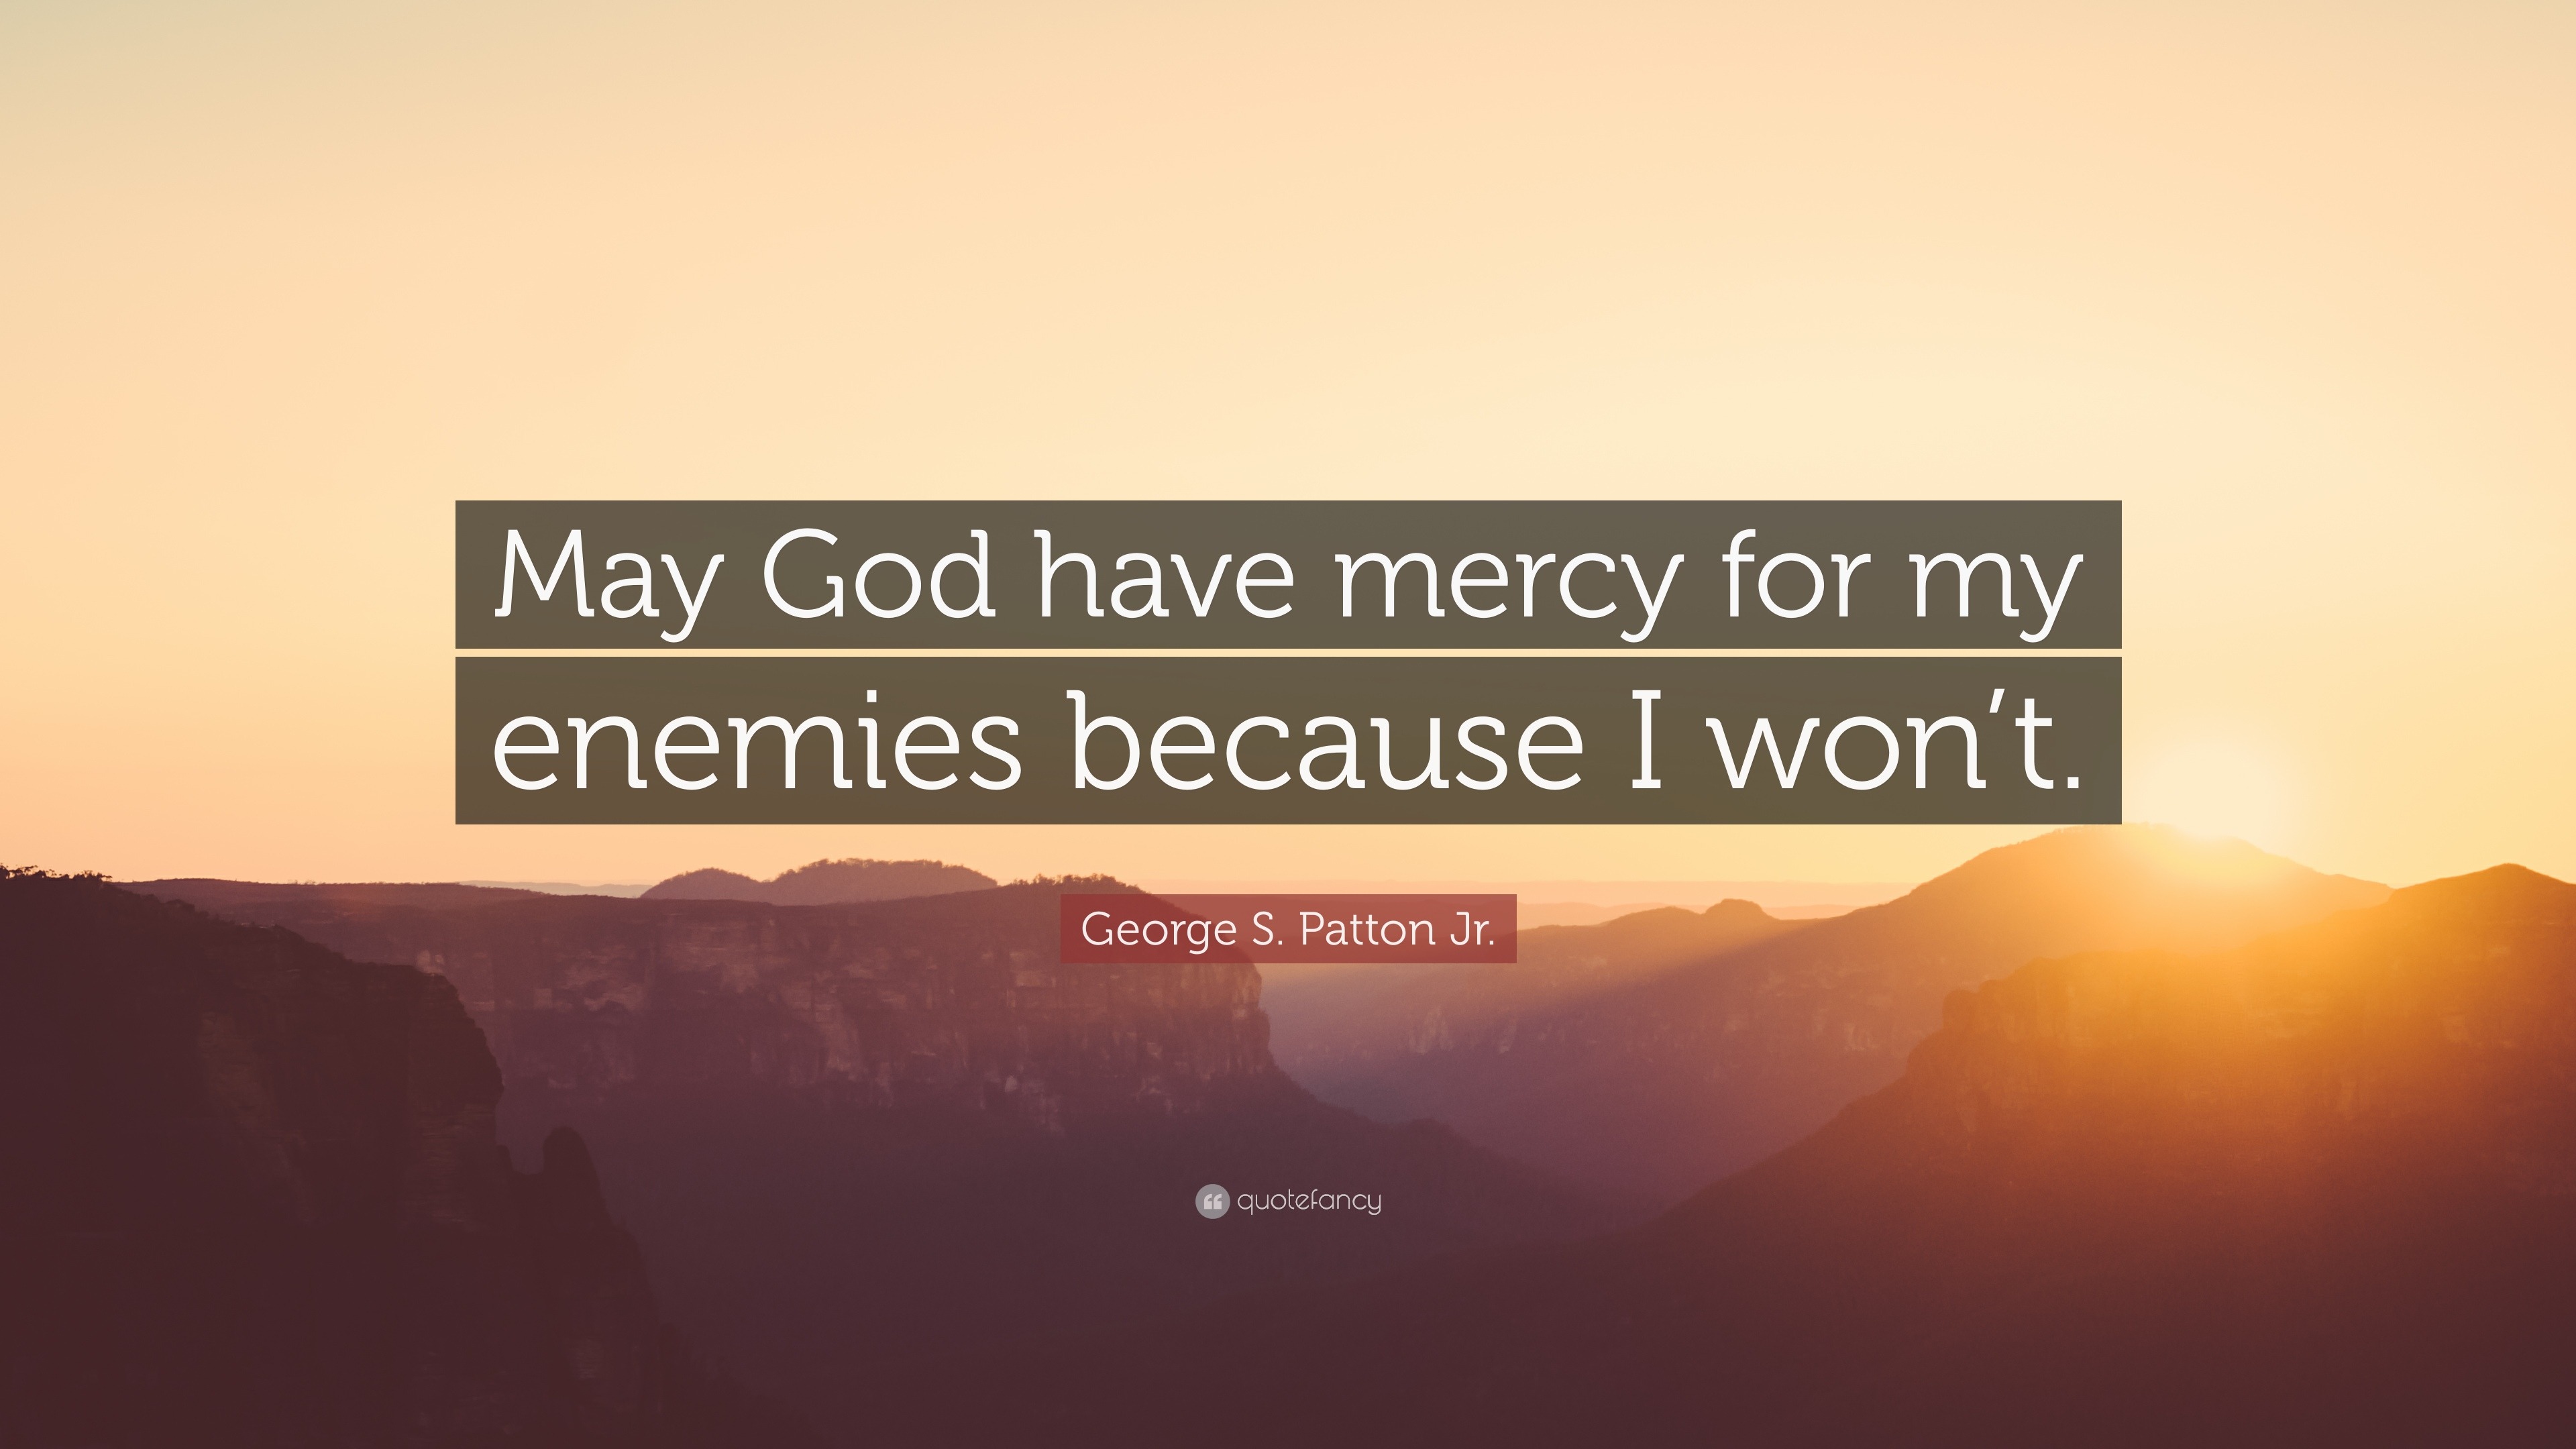 George S. Patton Jr. Quote: “May God have mercy for my enemies because